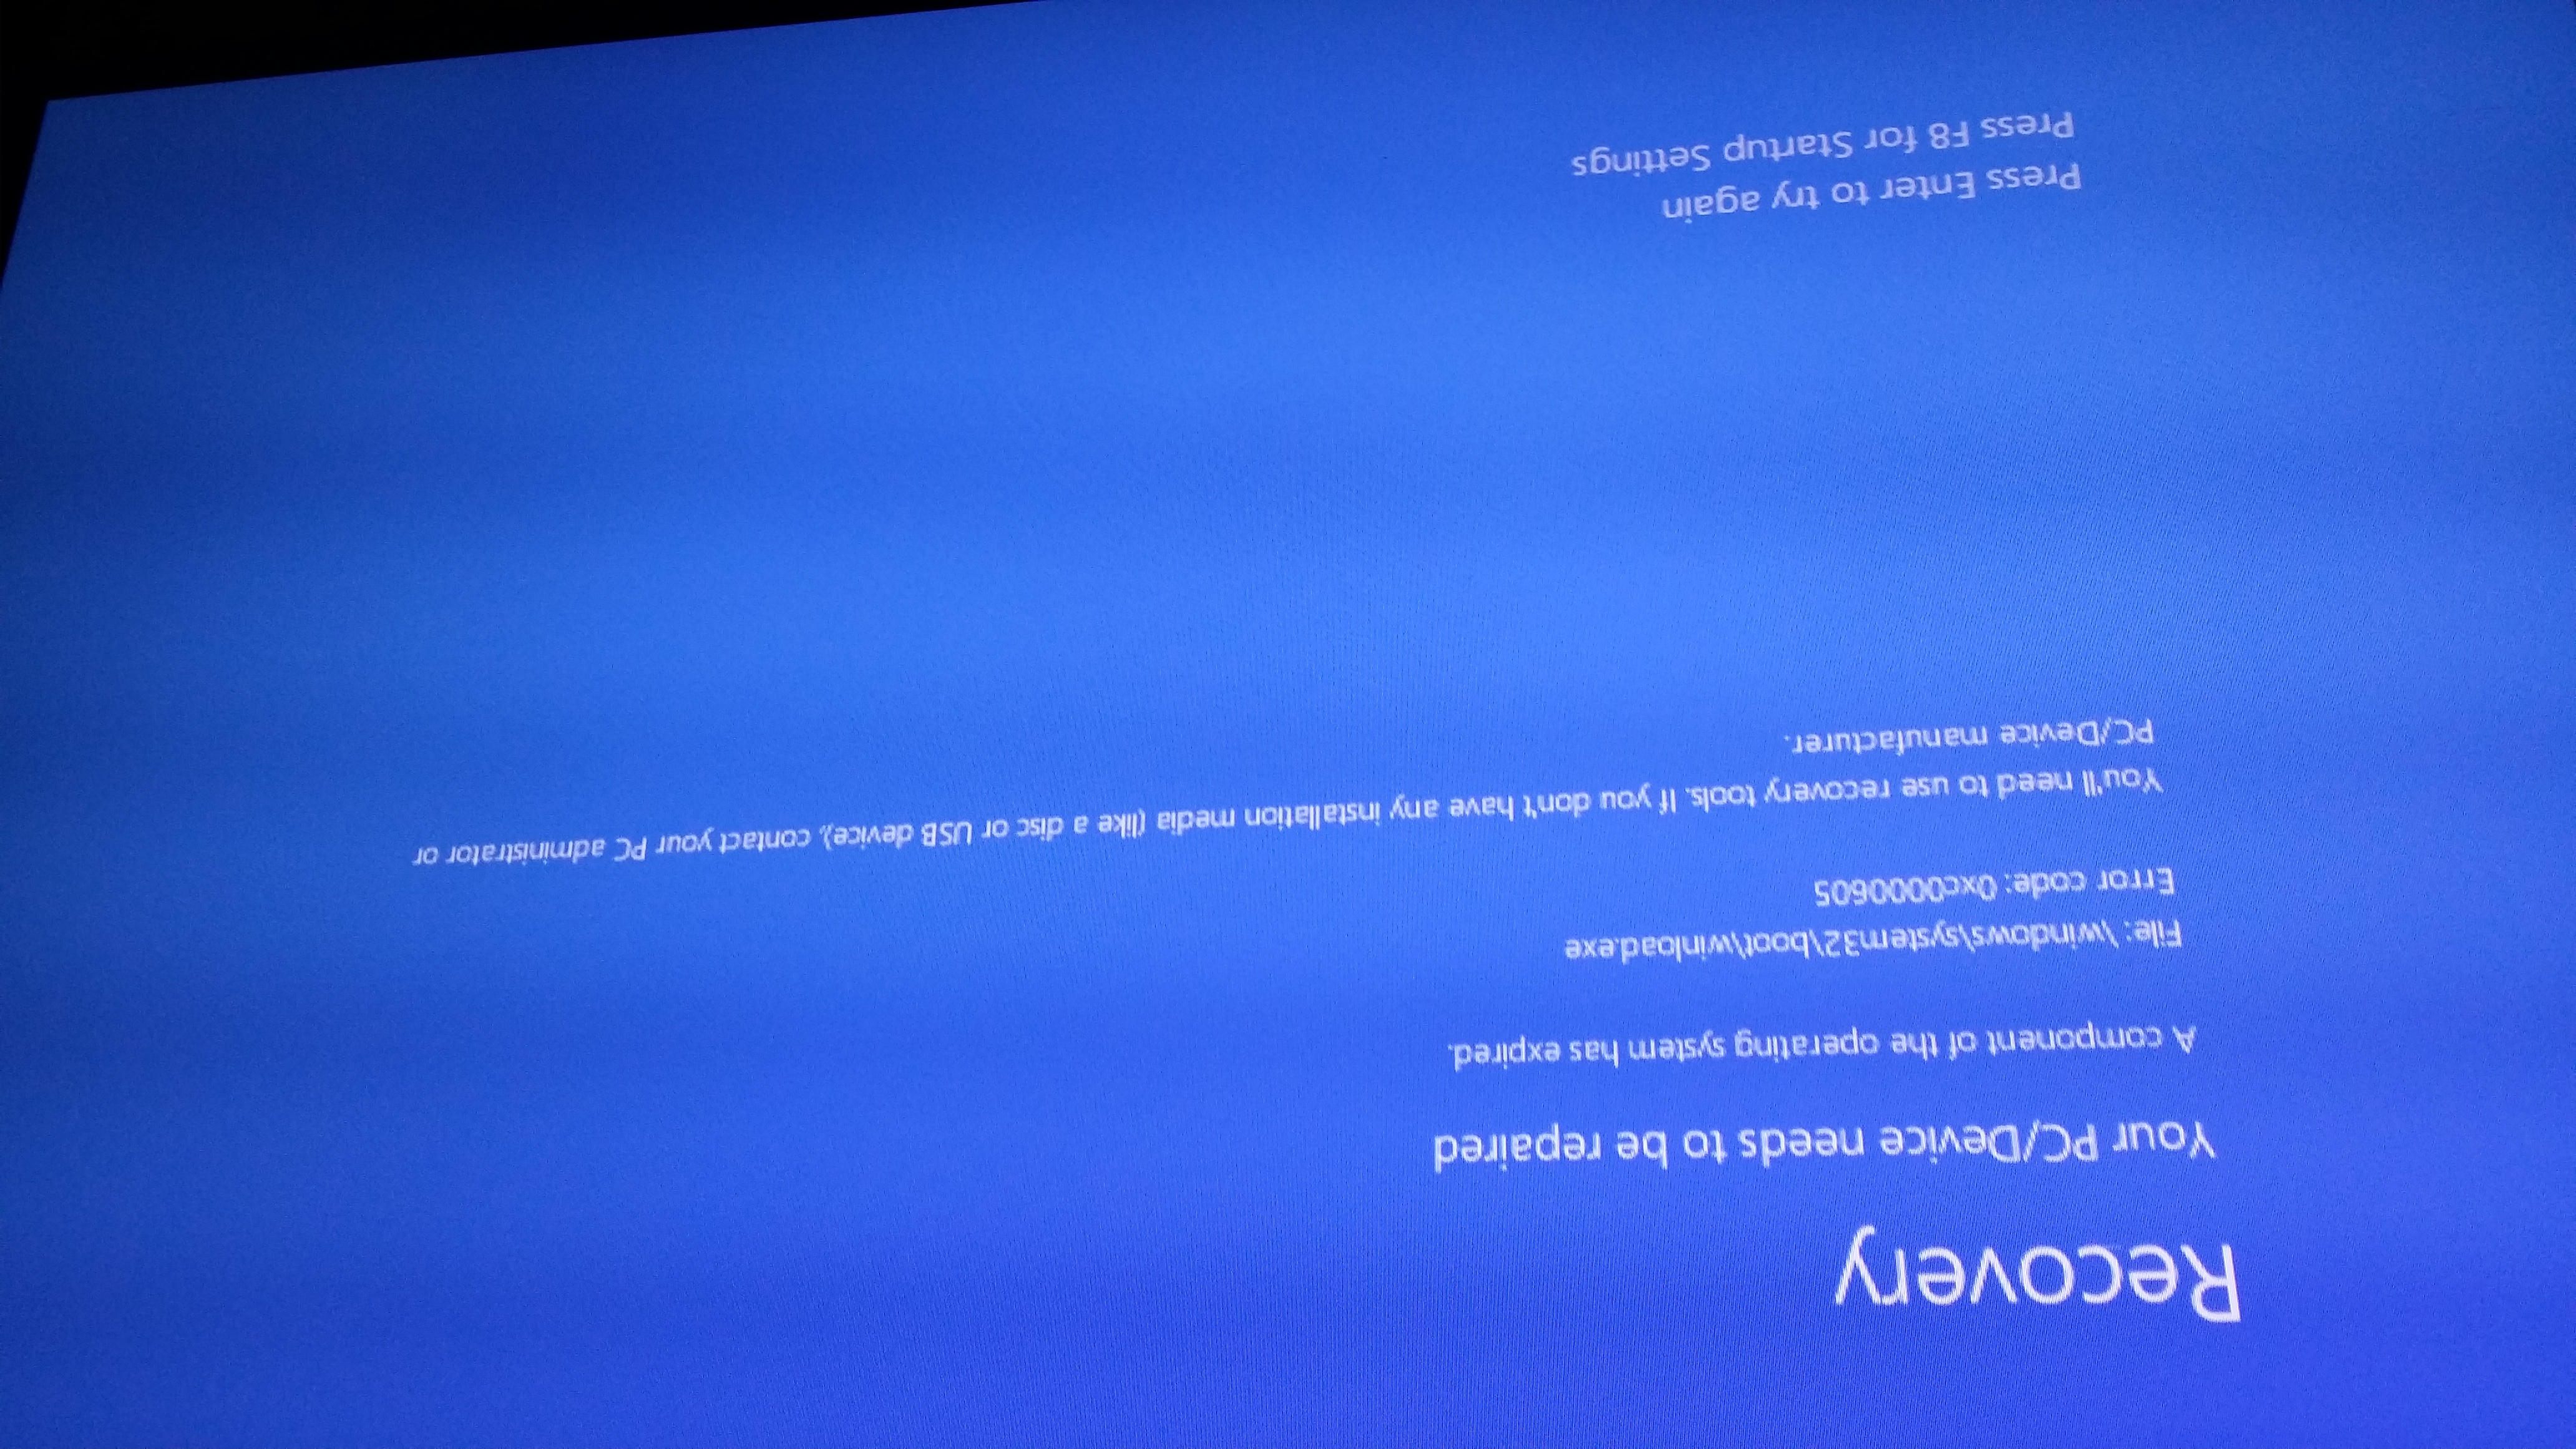 Can your pc. Синий экран смерти Windows 7. Your PC device needs to be Repaired. 0xc000000f BSOD. Windows Recovery environment.